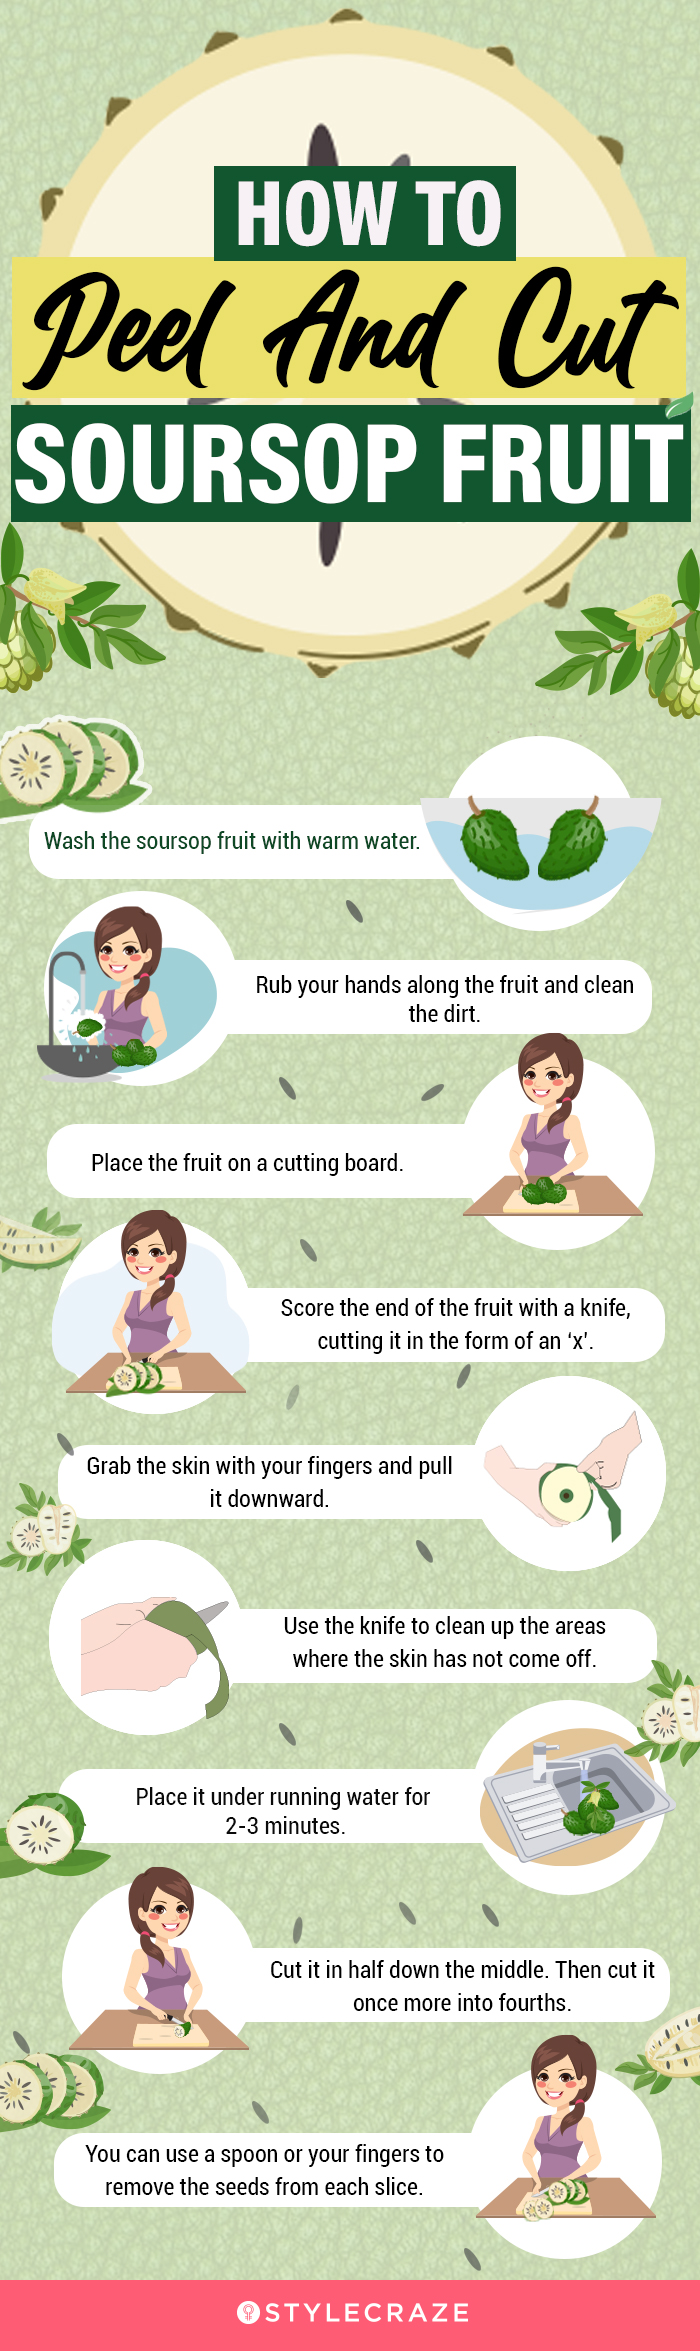 how to peel and cut soursop fruit [infographic]